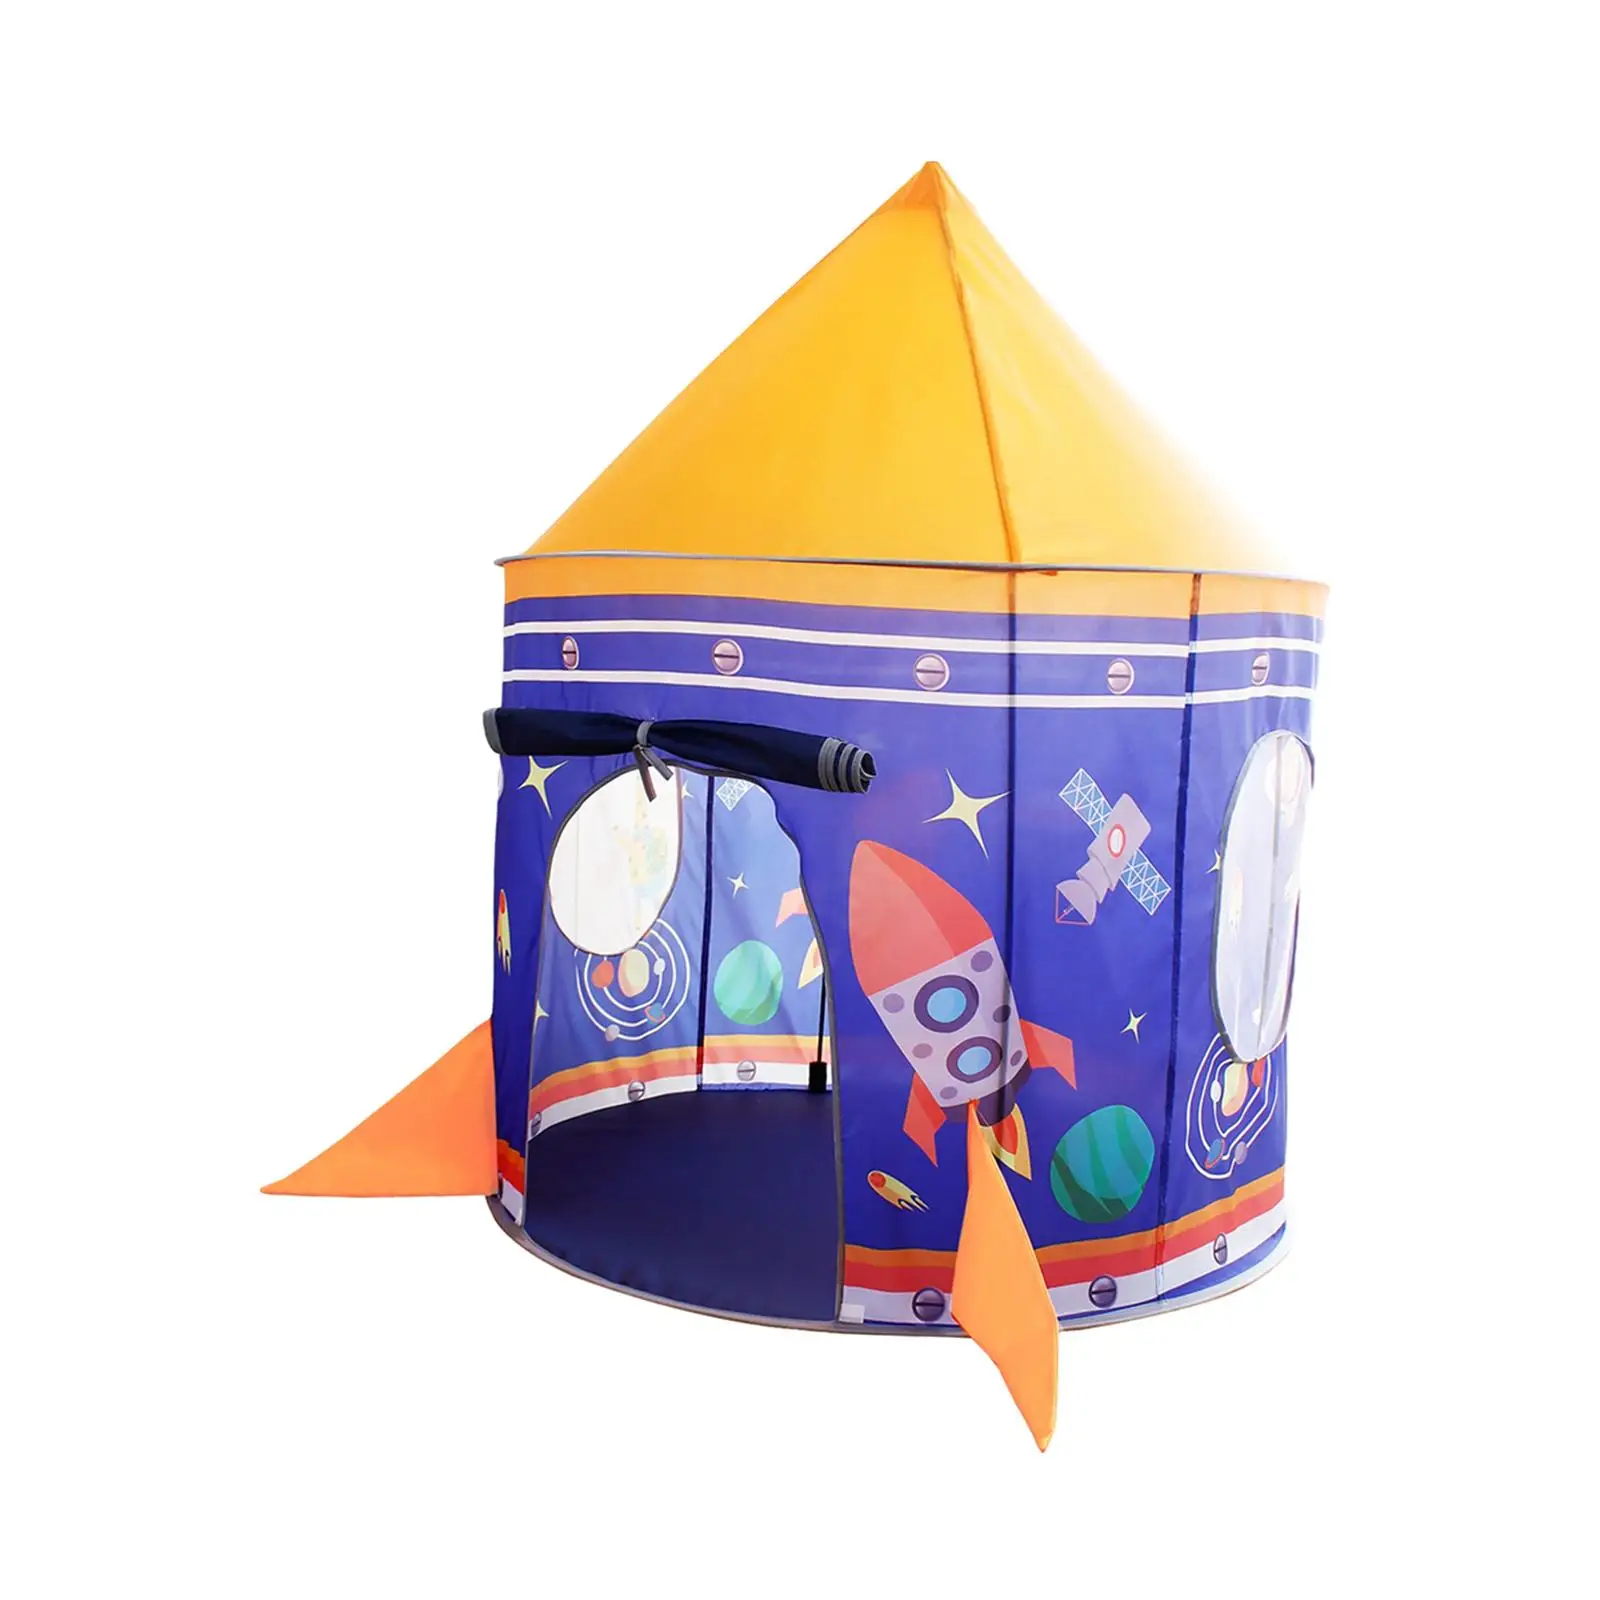 Portable Castle Pool Camping Toy Reading Tent and Playroom Playhouse Tent Toys